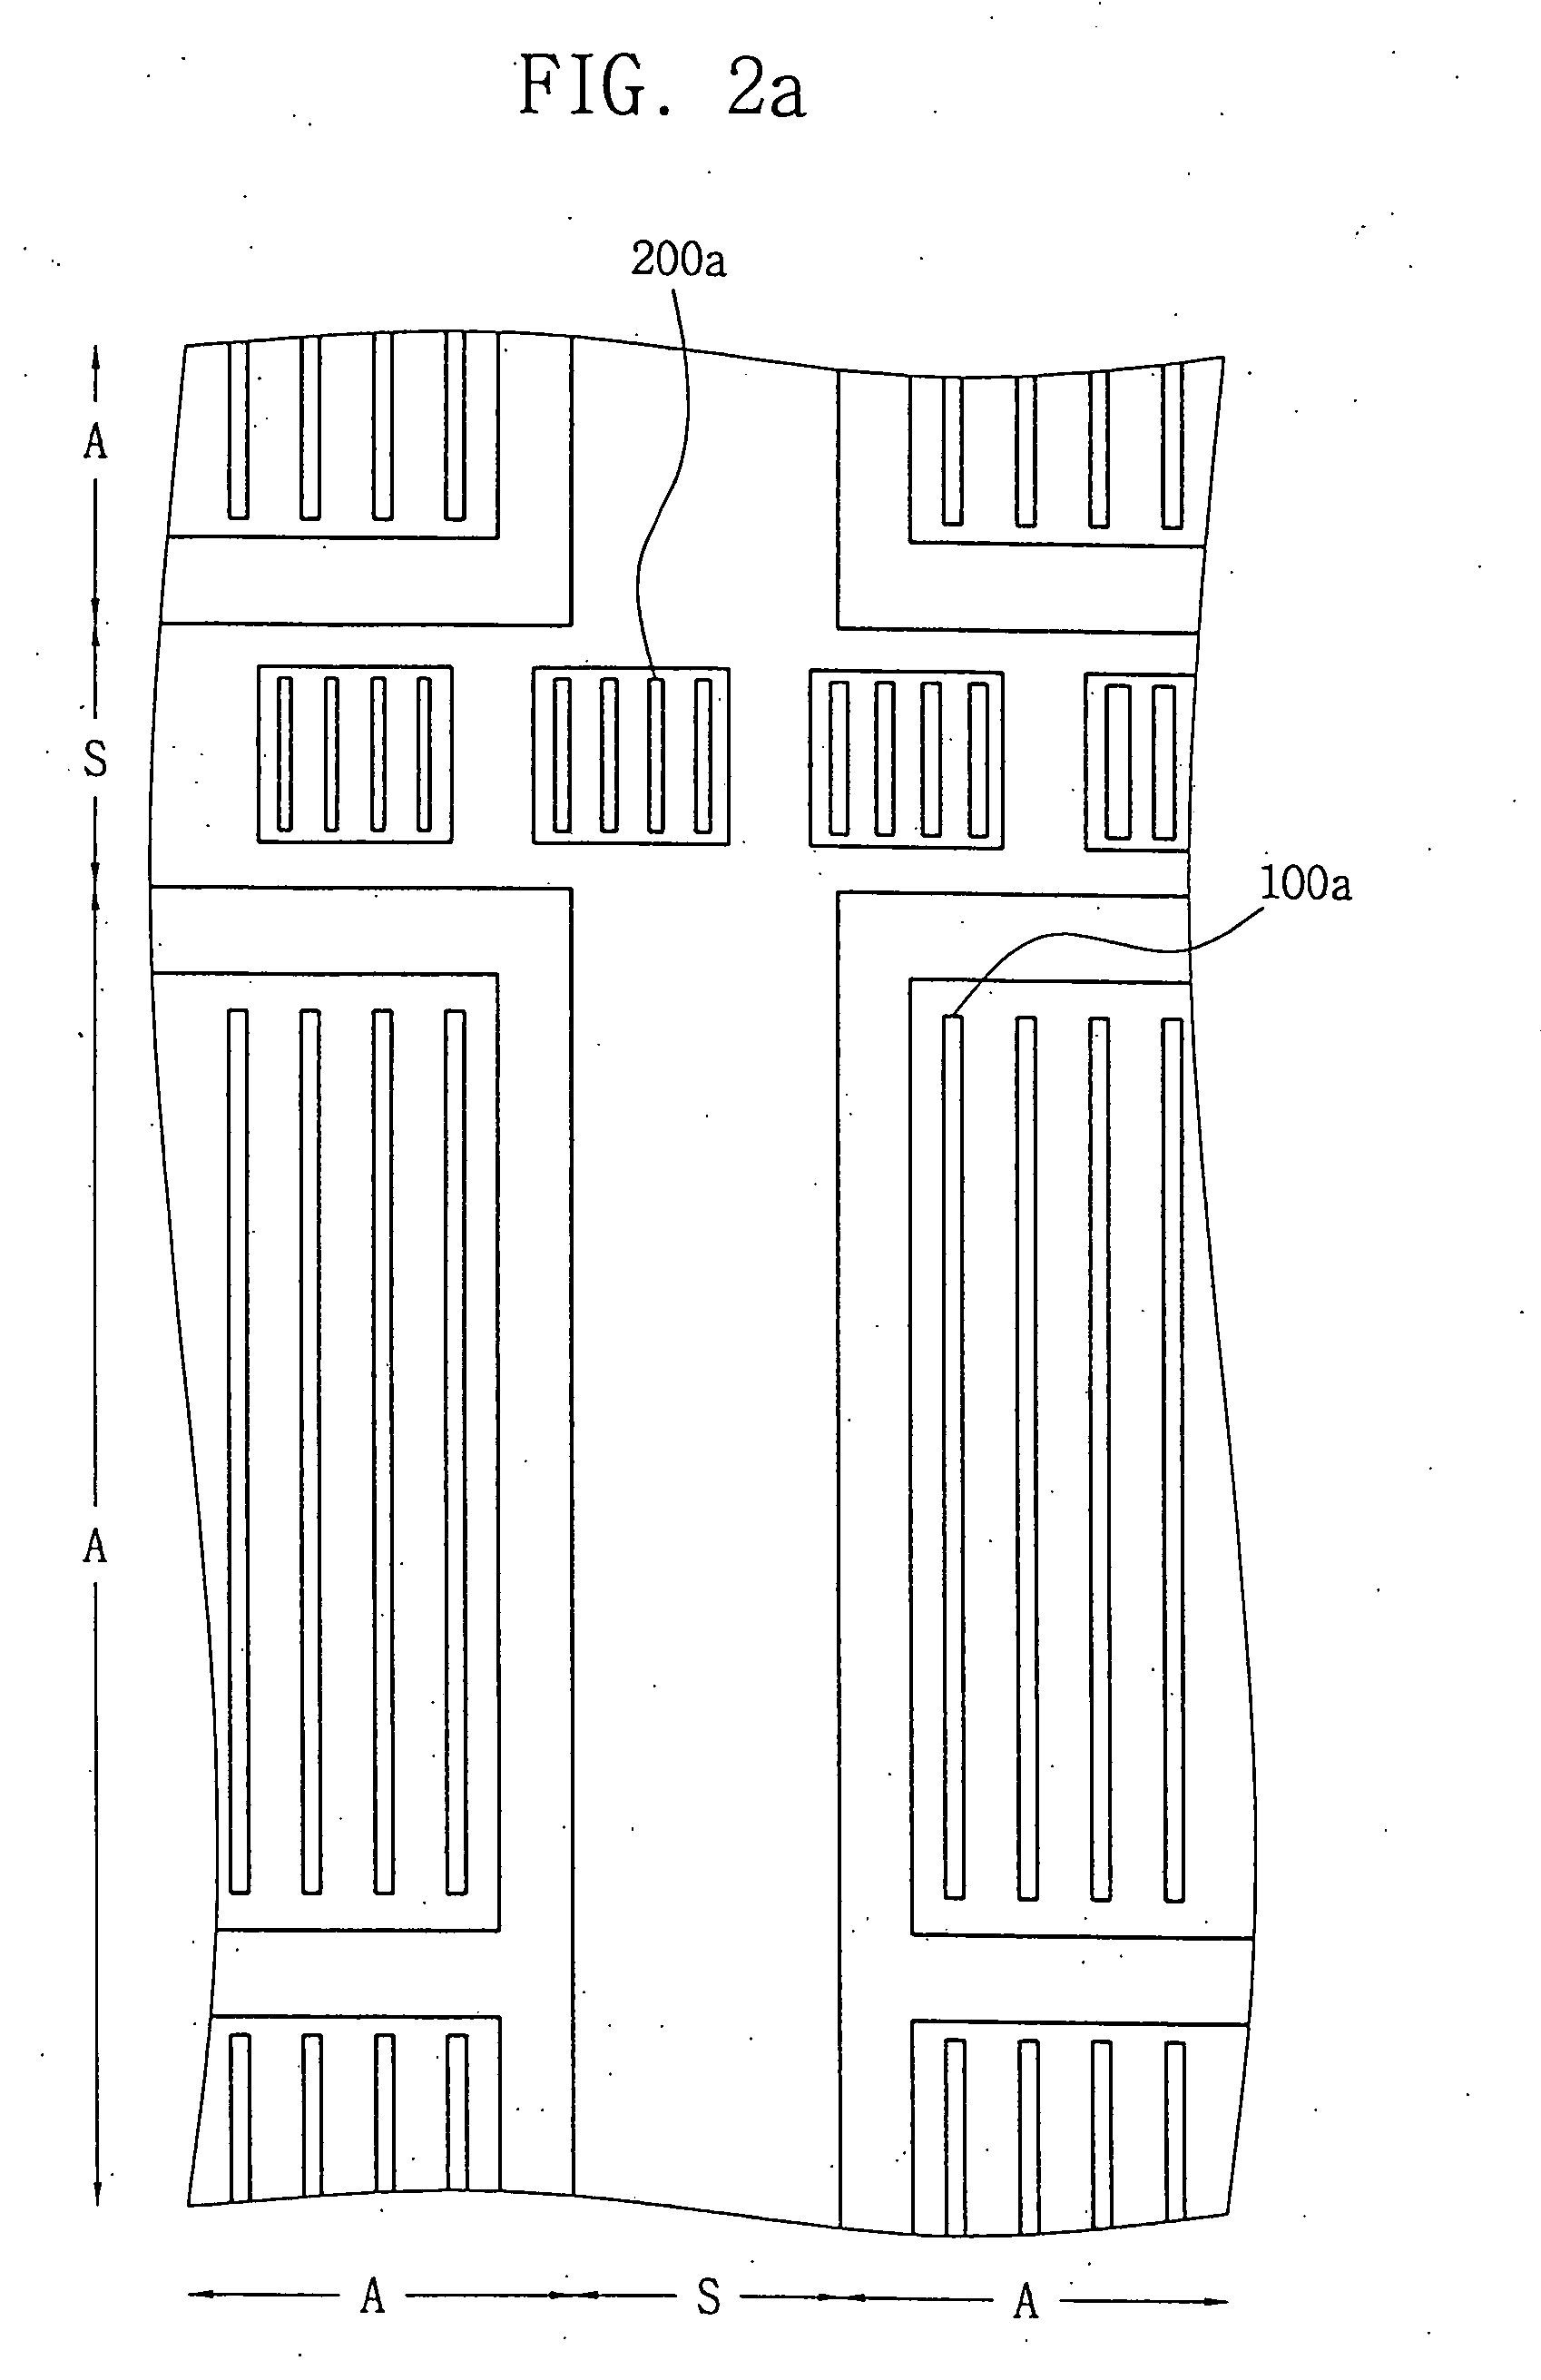 Photoresist pattern, method of fabricating the same, and method of assuring the quality thereof